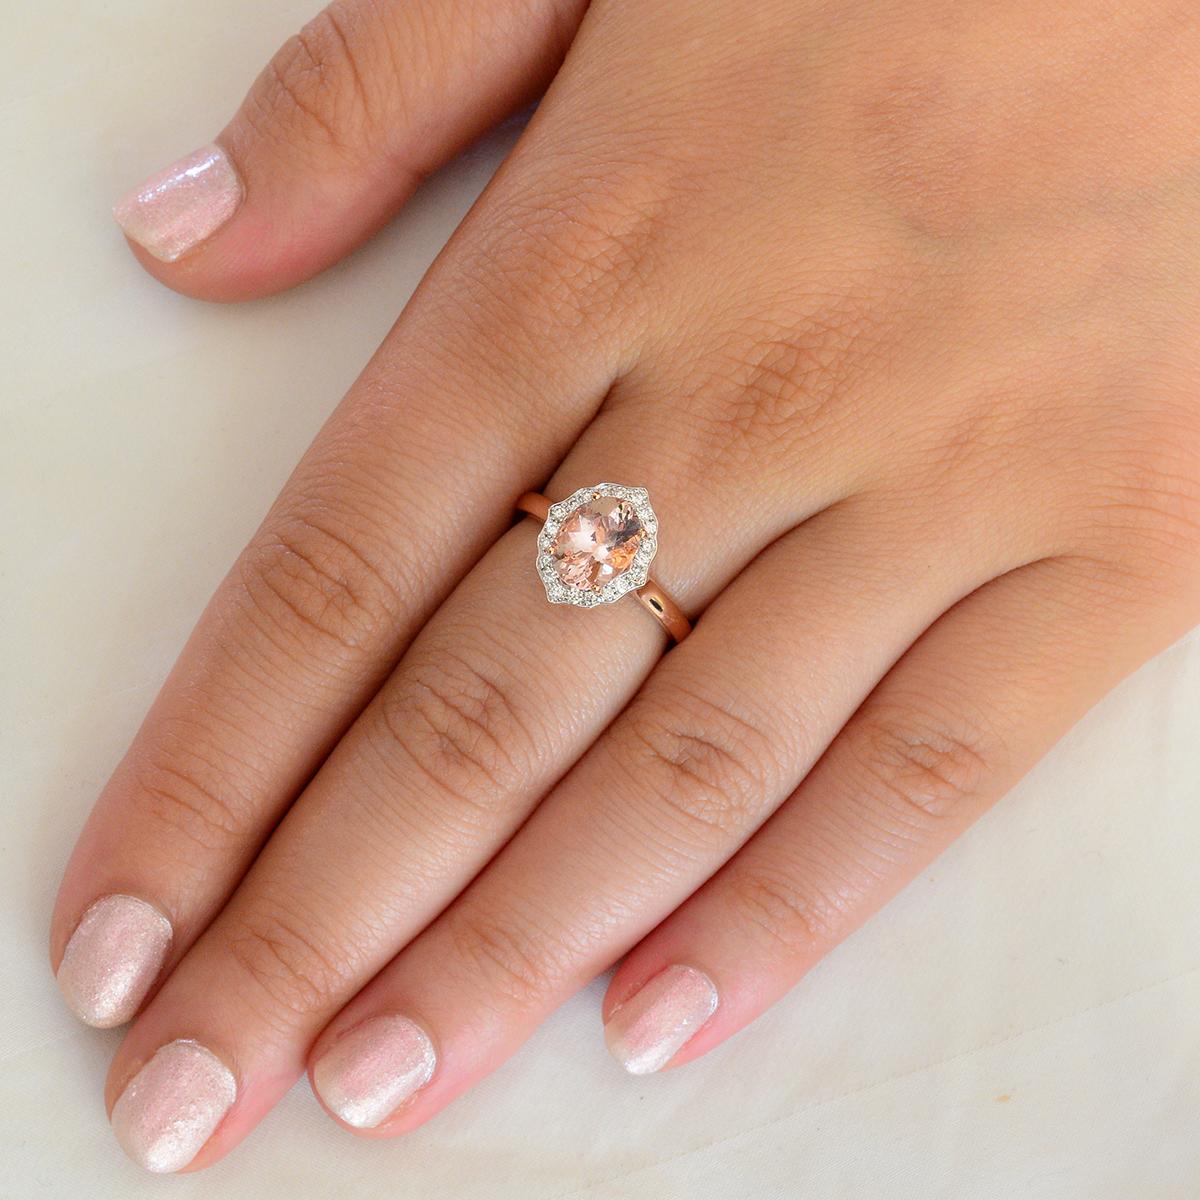 A beautifully crafted solid 18 carat rose gold ring featuring a quality 1.80 carat morganite adorned with 20 diamonds in an alluring  halo setting. The morganite is natural and earth mined and is an eye pleasing salmon pink in colour with a lovely